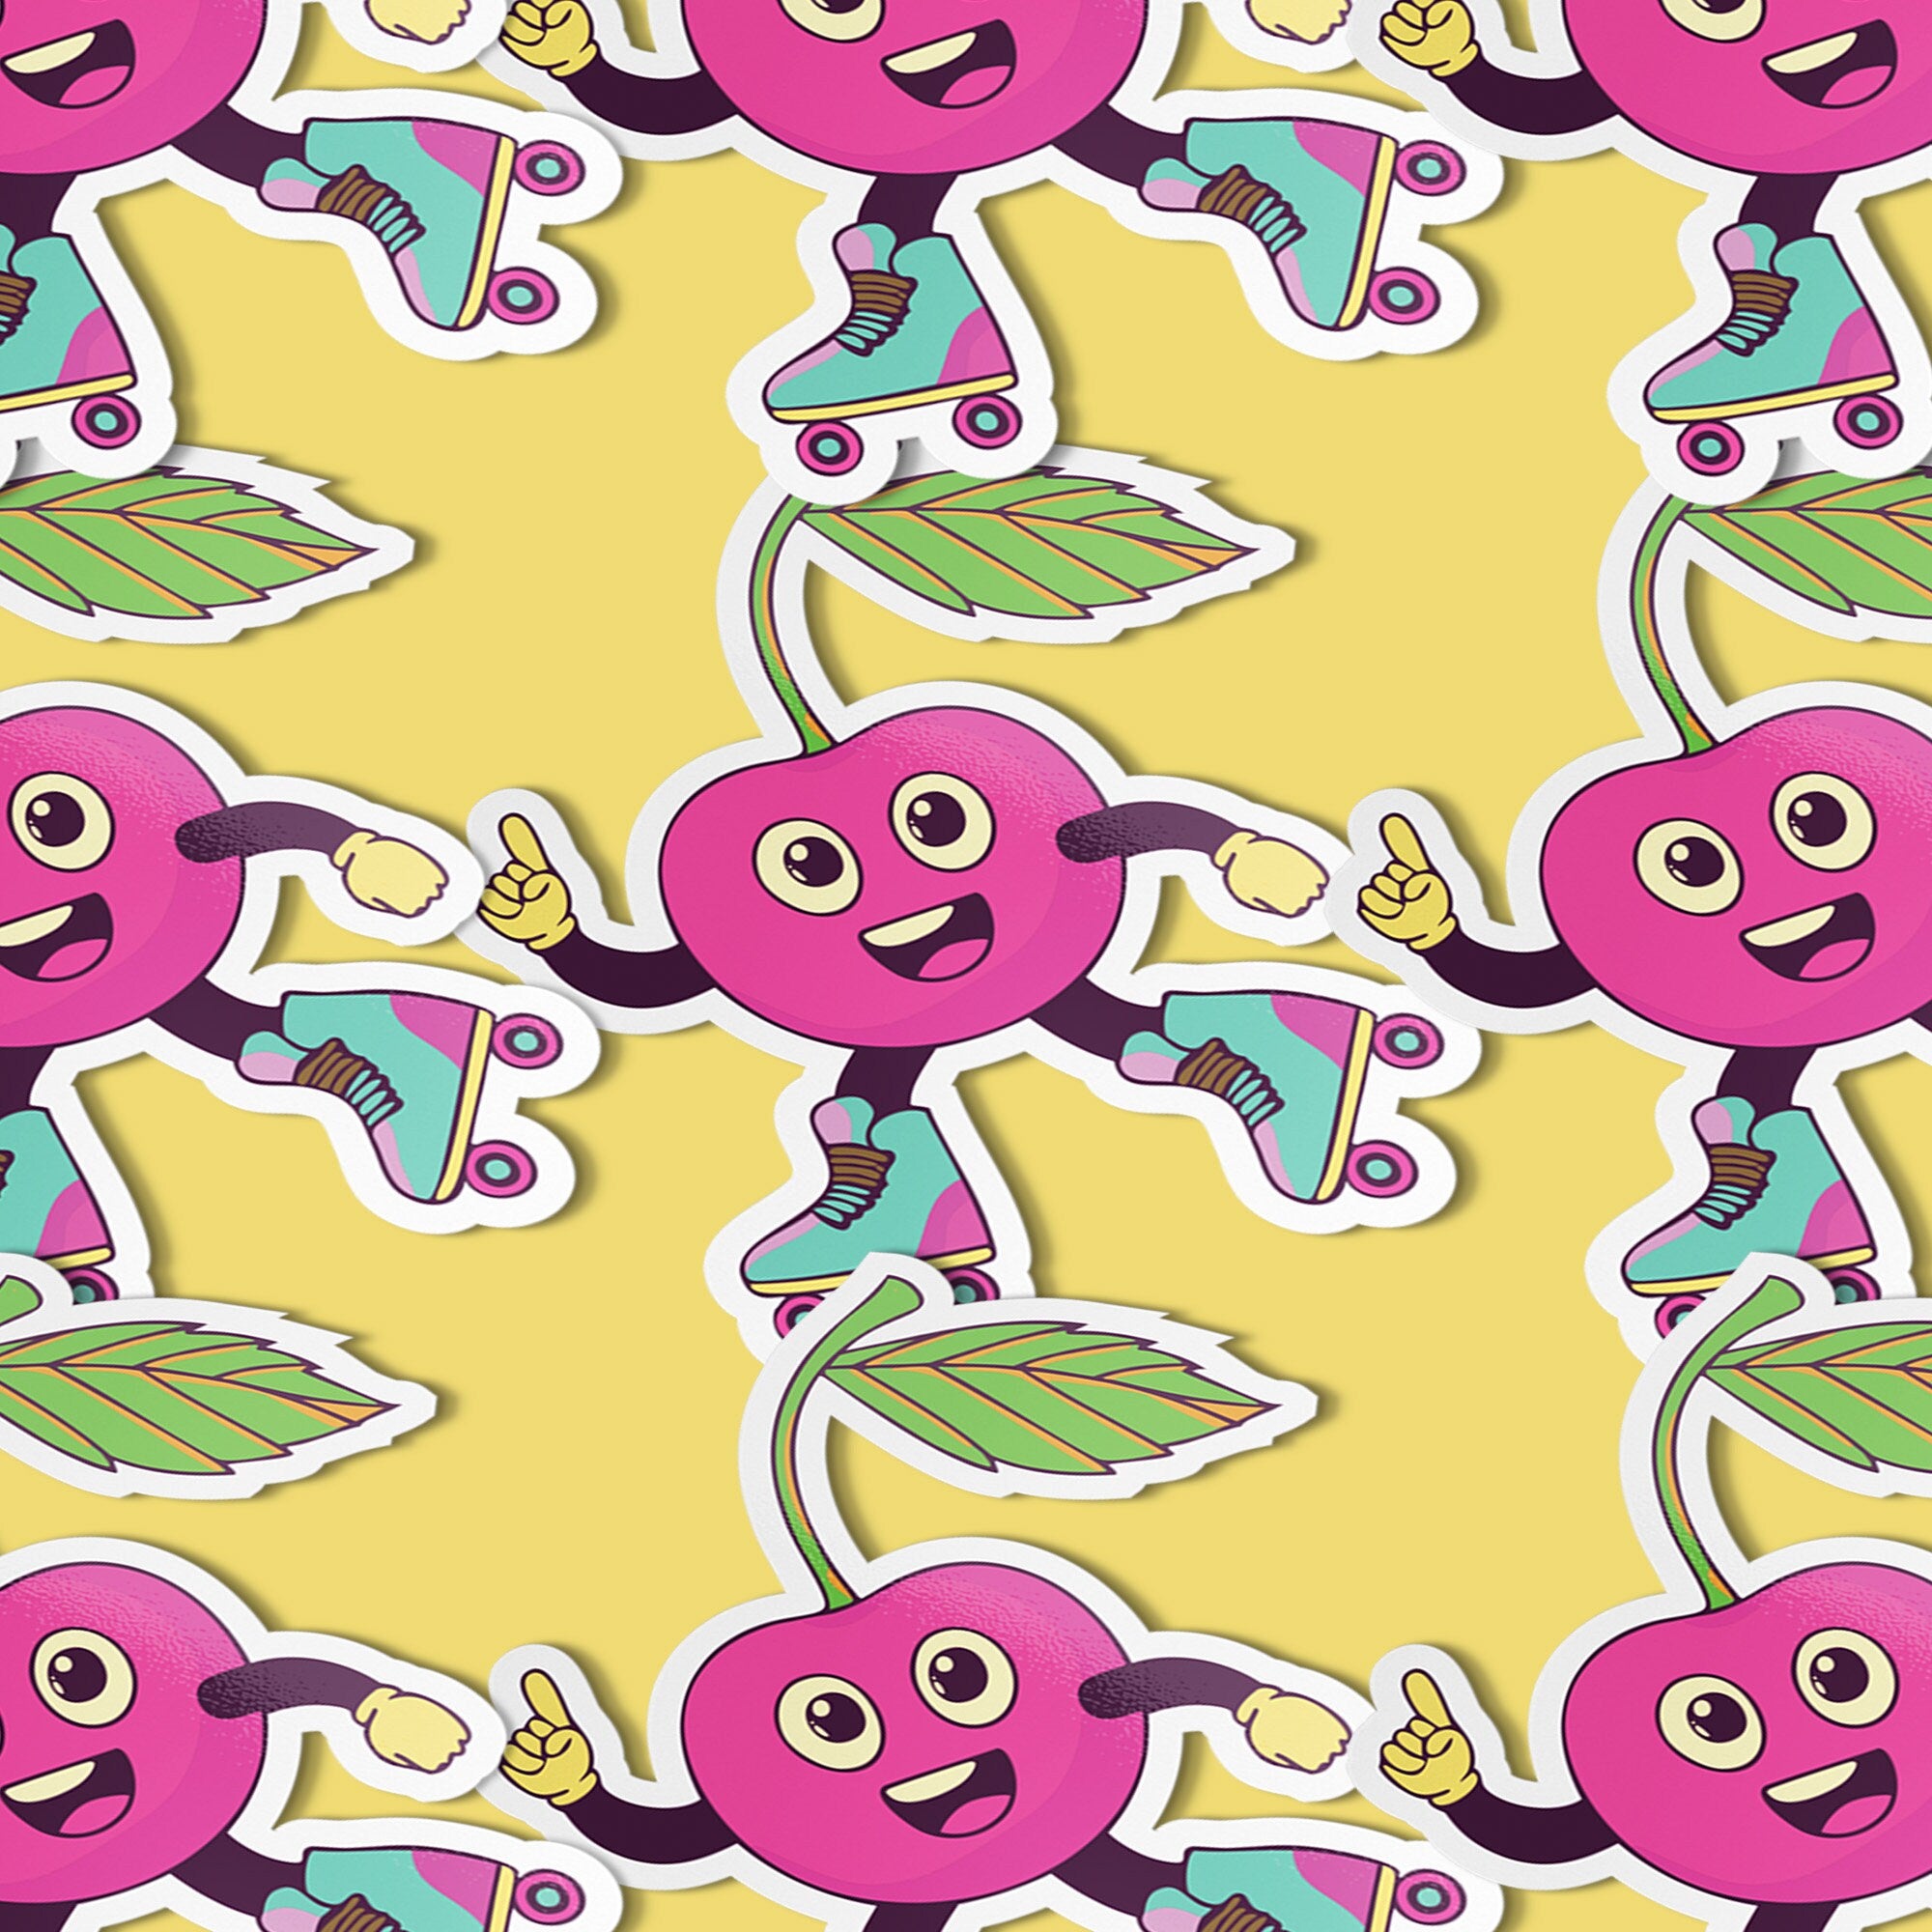 Bright cherry sticker with roller skates, perfect for adding fun to roller derby helmets and planners. Available in Prism, Gem, and Glitter finishes. Handmade in Austin, Texas.